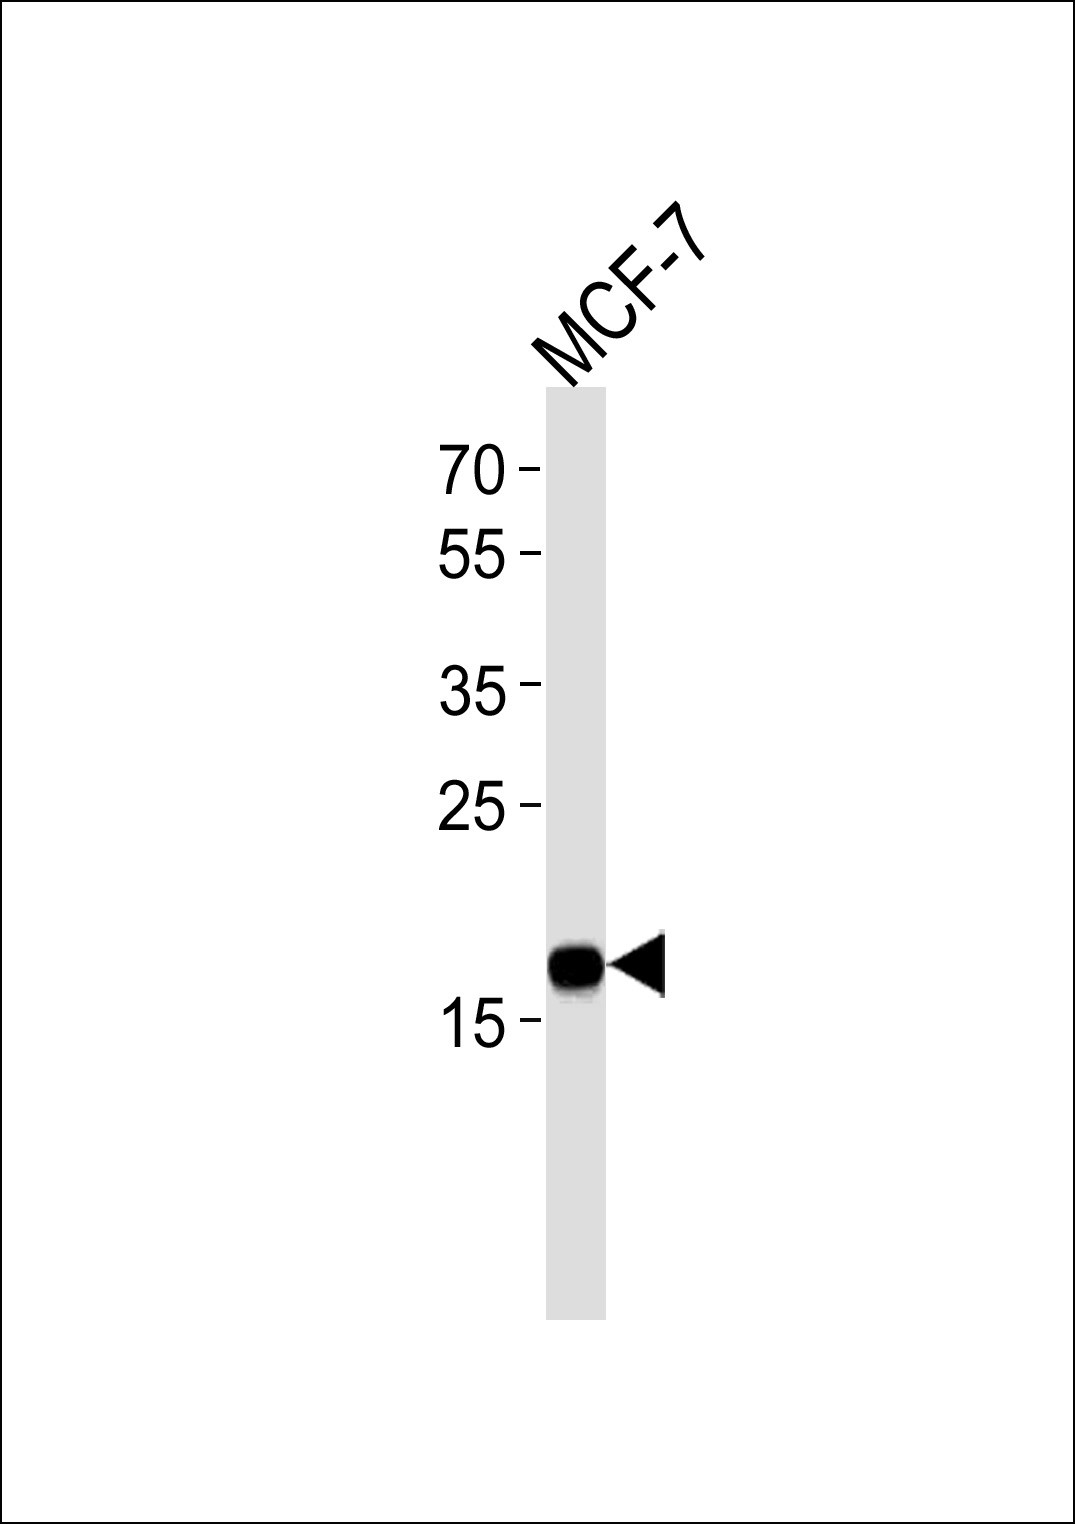 NME1 Antibody(Cat. #AM2209b) western blot analysis in MCF-7 cell line lysates (35?g/lane).This demonstrates the NME1 antibody detected the NME1 protein (arrow).